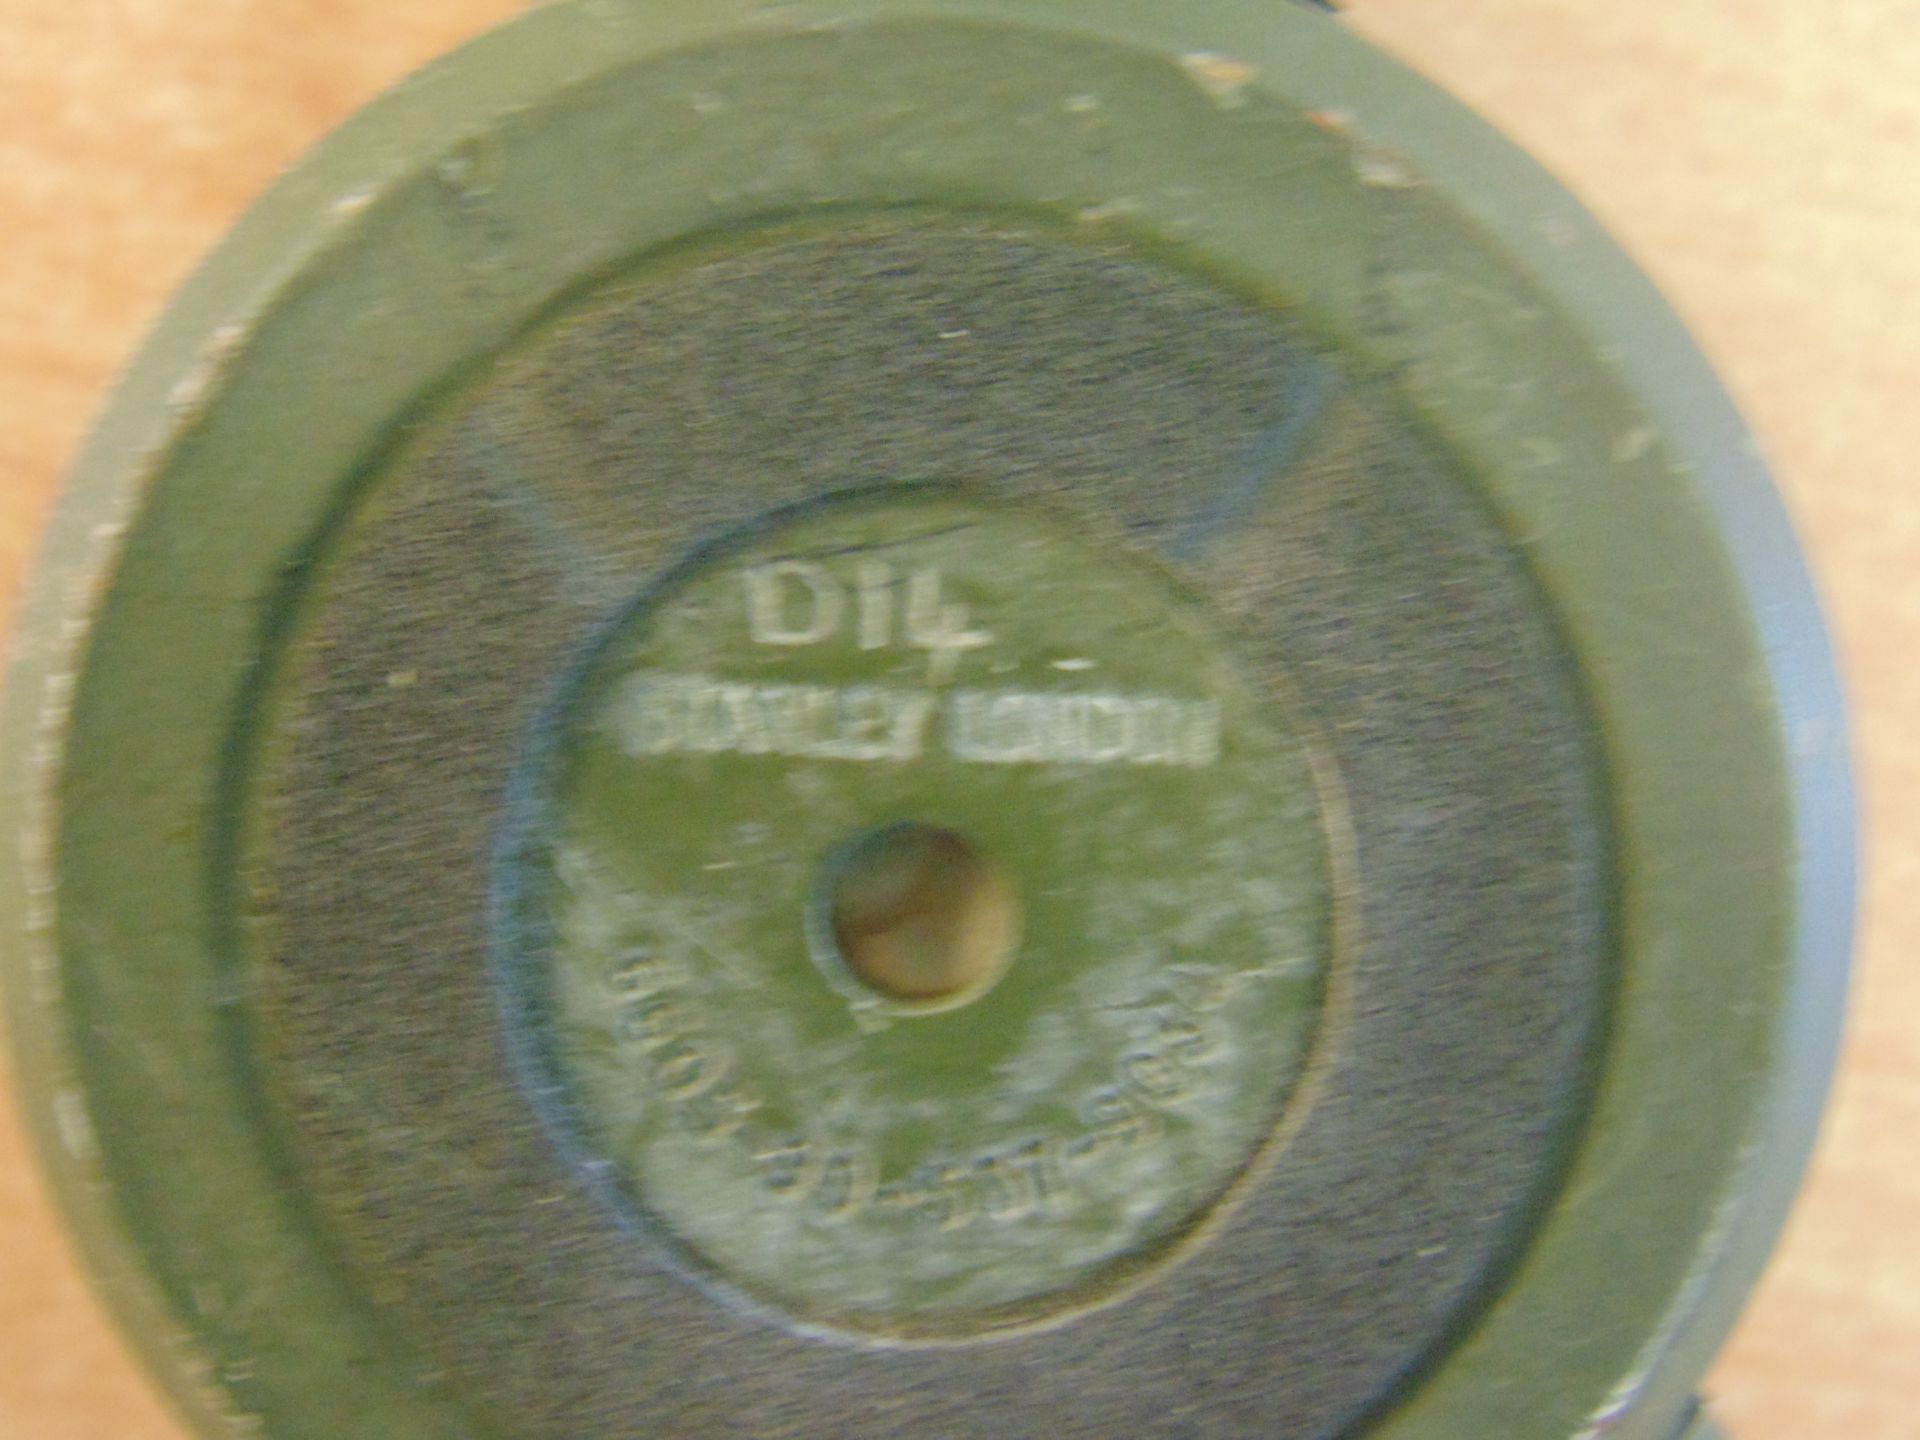 STANLEY LONDON BRASS PRISMATIC COMPASS BRITISH ARMY ISSUE NATO MARKS - Image 5 of 7